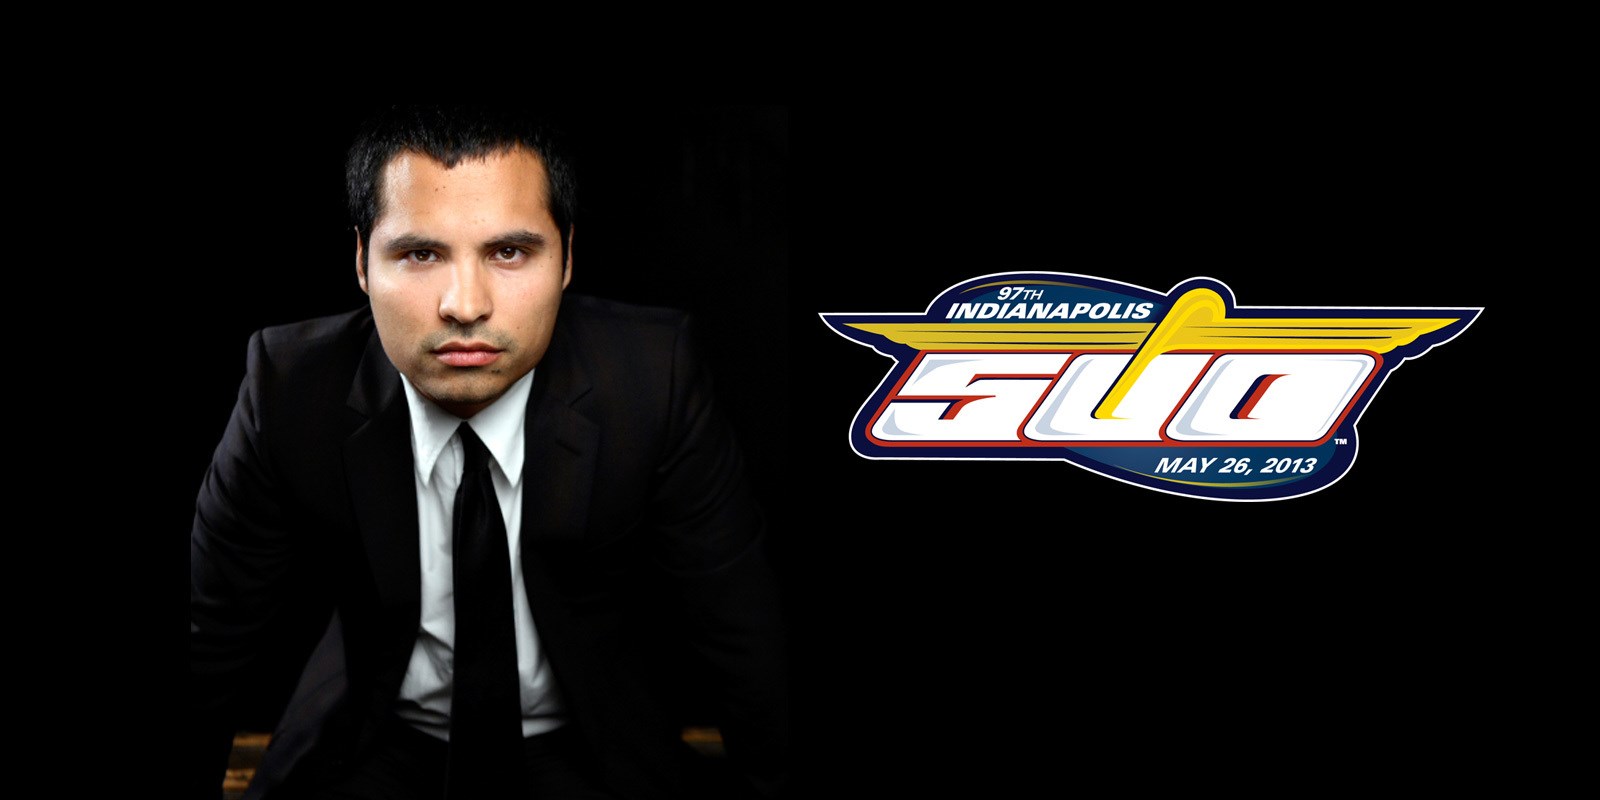 &#39;Turbo&#39; Actor Michael Pena To Serve As 97th Indianapolis 500 Honorary Starter